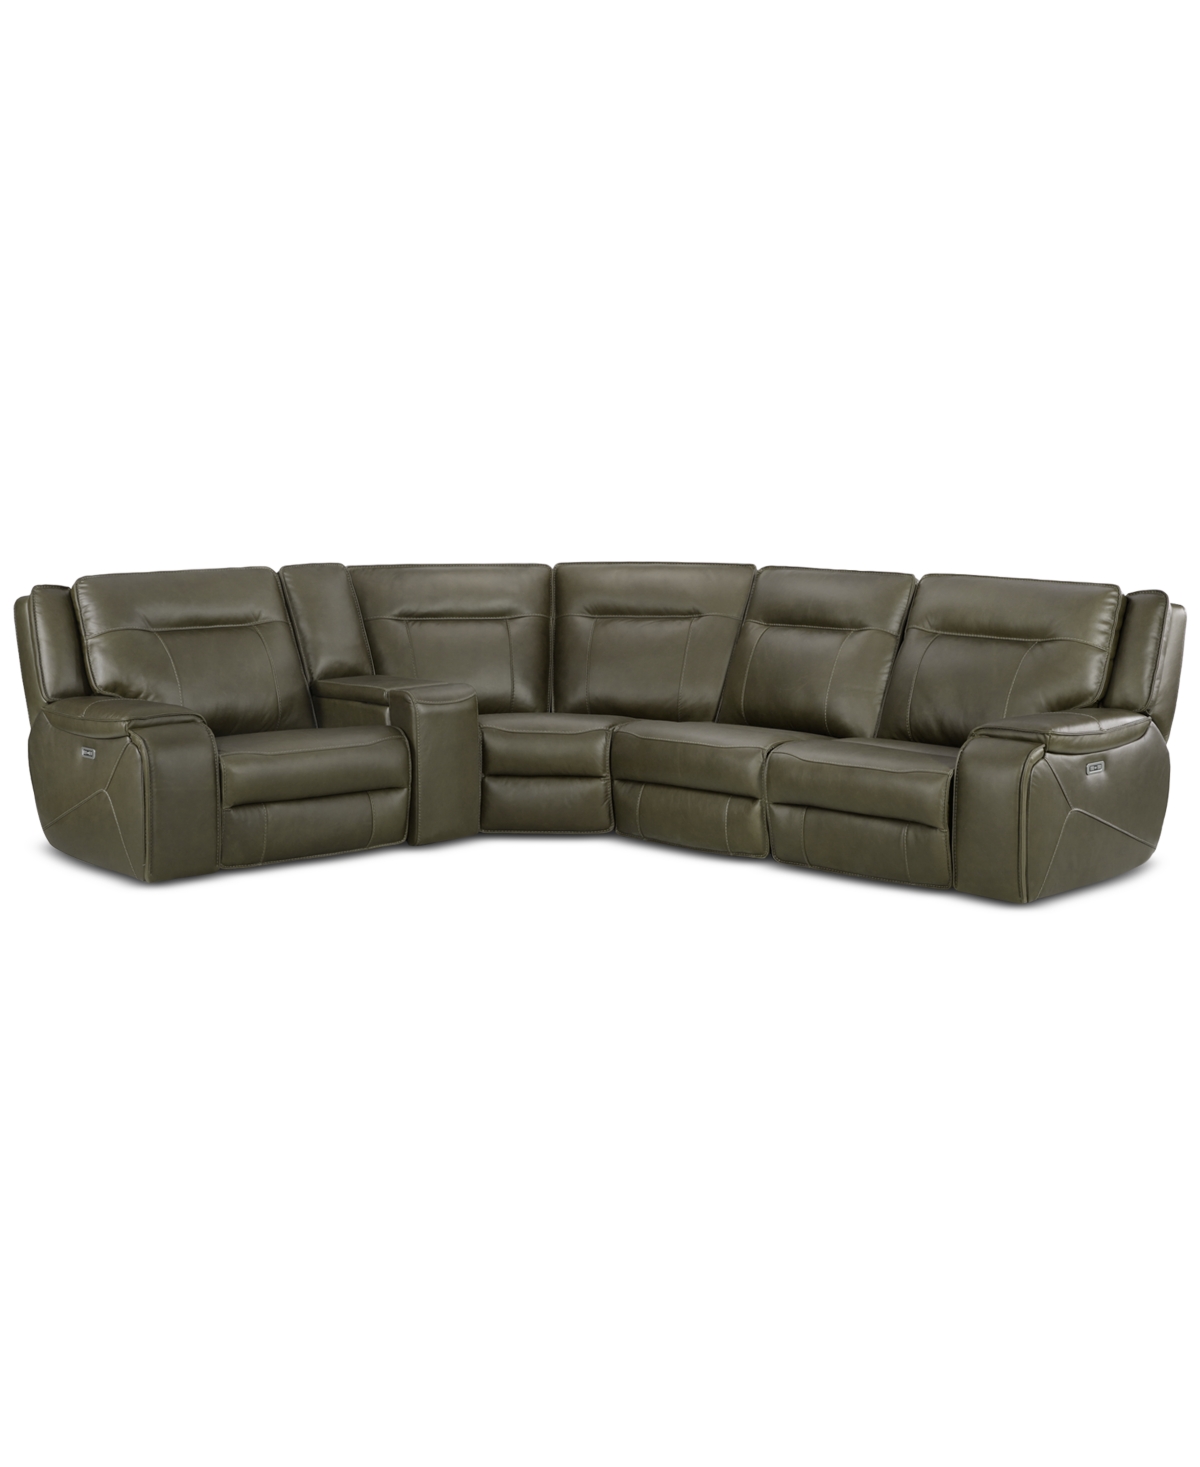 Macy's Hansley 5-pc. Zero Gravity Leather Sectional With 2 Power Recliners, Created For  In Brown